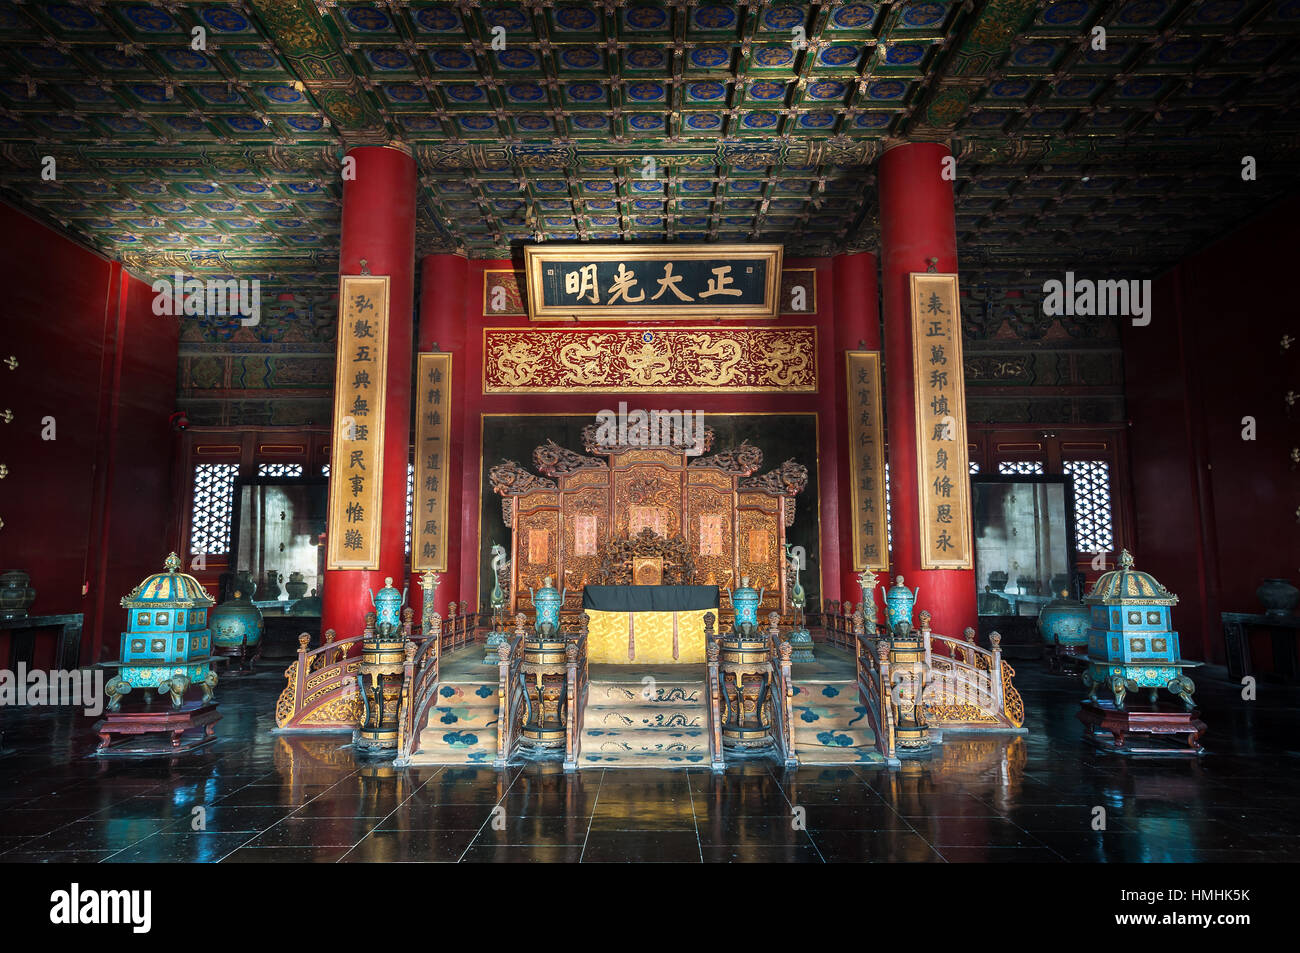 The Emperor's throne inside the Palace of Heavenly Purity at the Forbidden City, Beijing Stock Photo